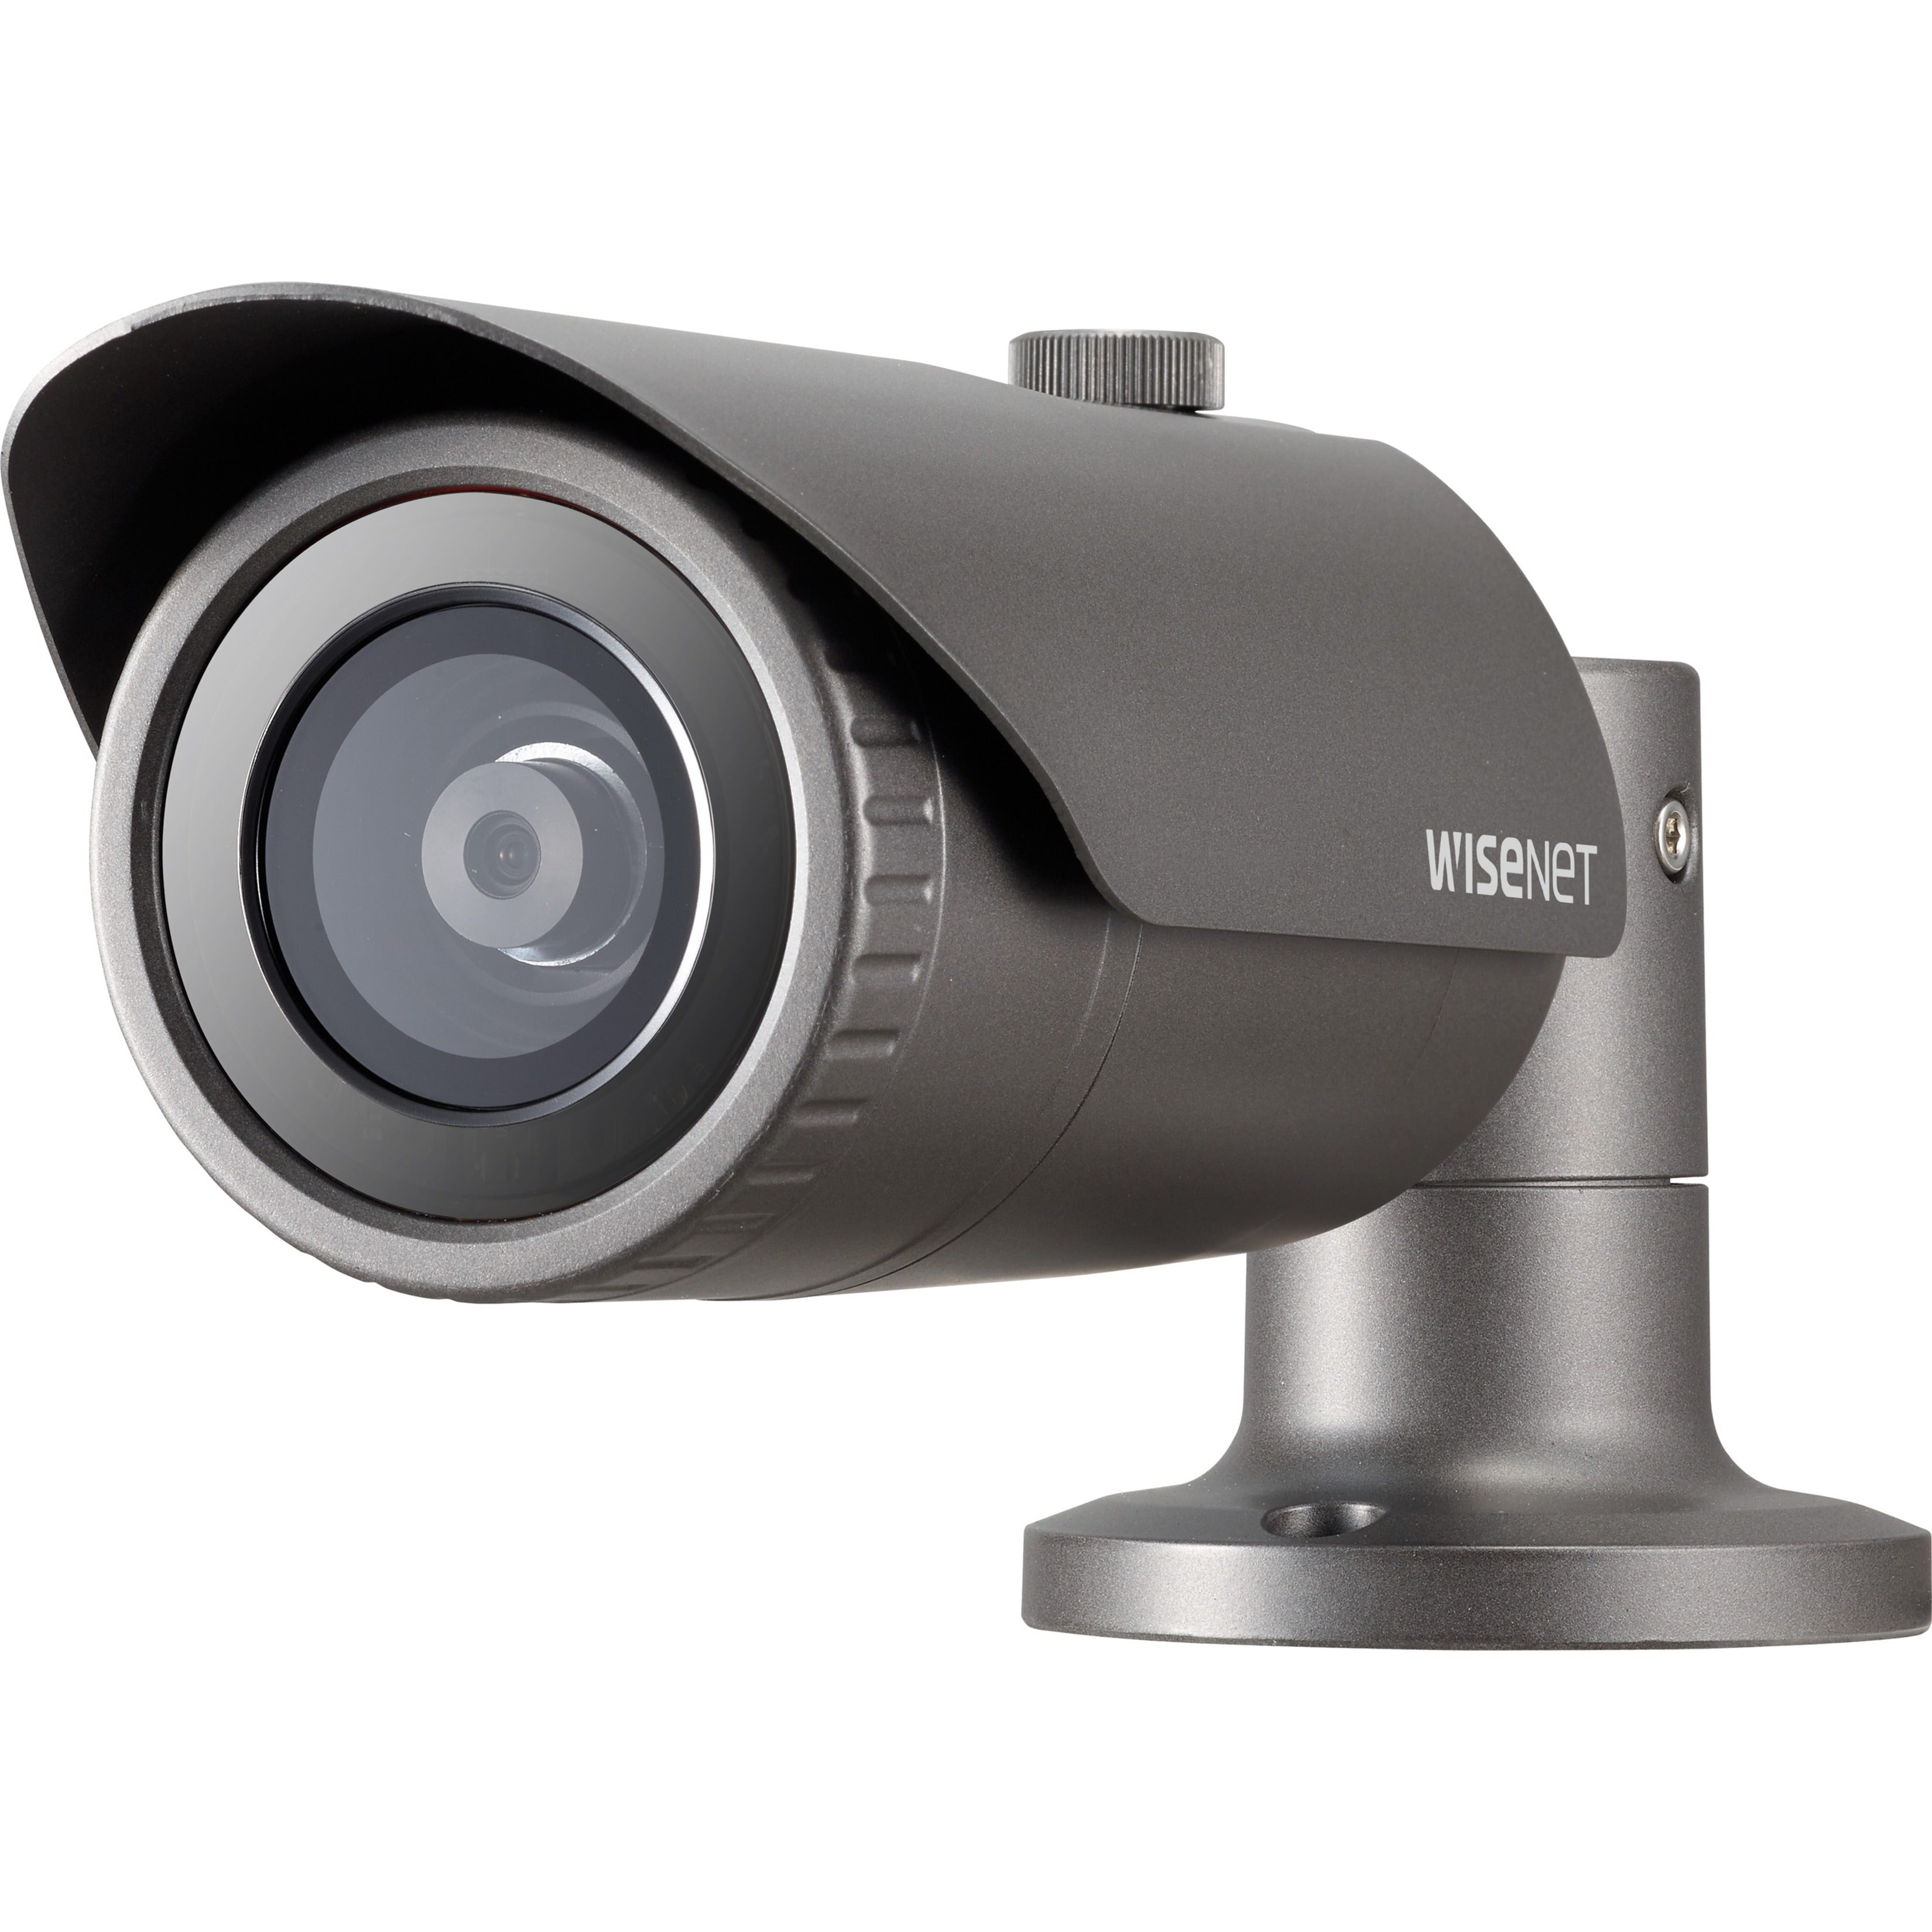 Wisenet Q QNO-8010R 5 MP Network IR Bullet Camera with 2.8mm Lens, Outdoor Vandal Proof, Triple Codec, 120dB WDR